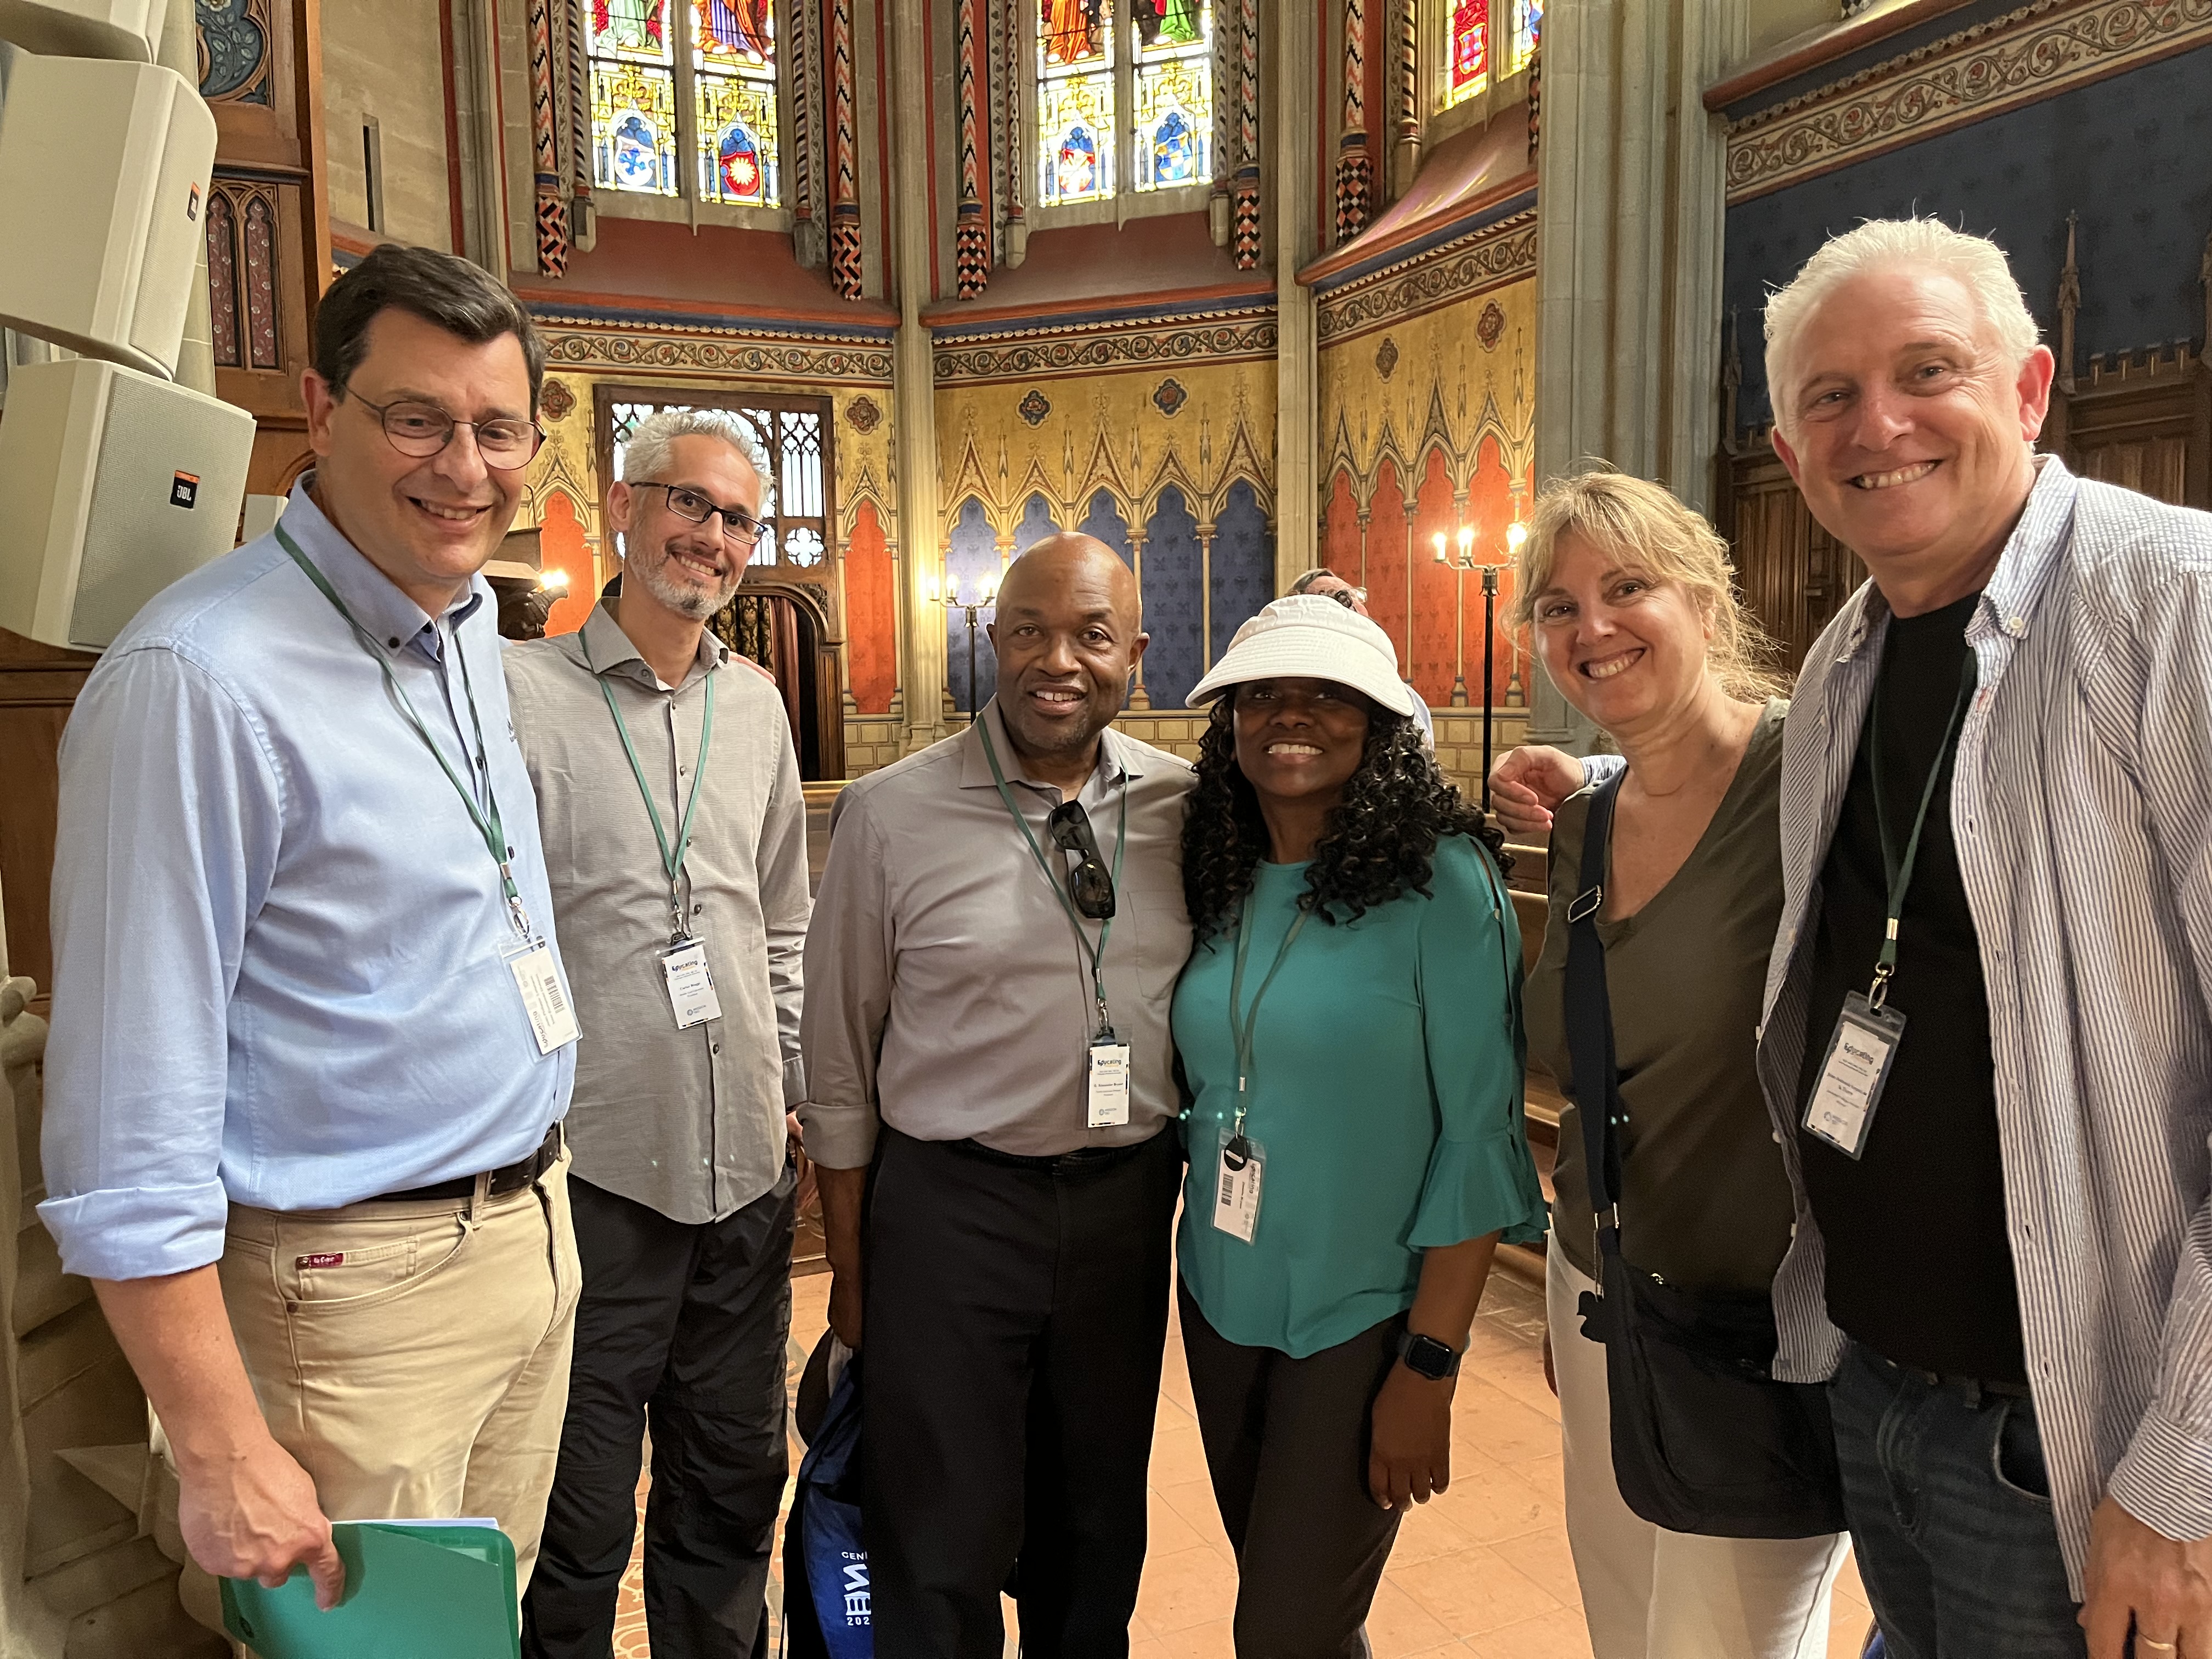 Elder Bryant, des, Juan Antonio (ACA) and his wife with the president of Collonges (. Jean Phillipe) and Ben (boys Dean Collonges) in the Chapelle of St Pierre Cathedral. St Pierre Cathedral was home church of reformer John Calvin one of the leaders of the Protestant reformation 